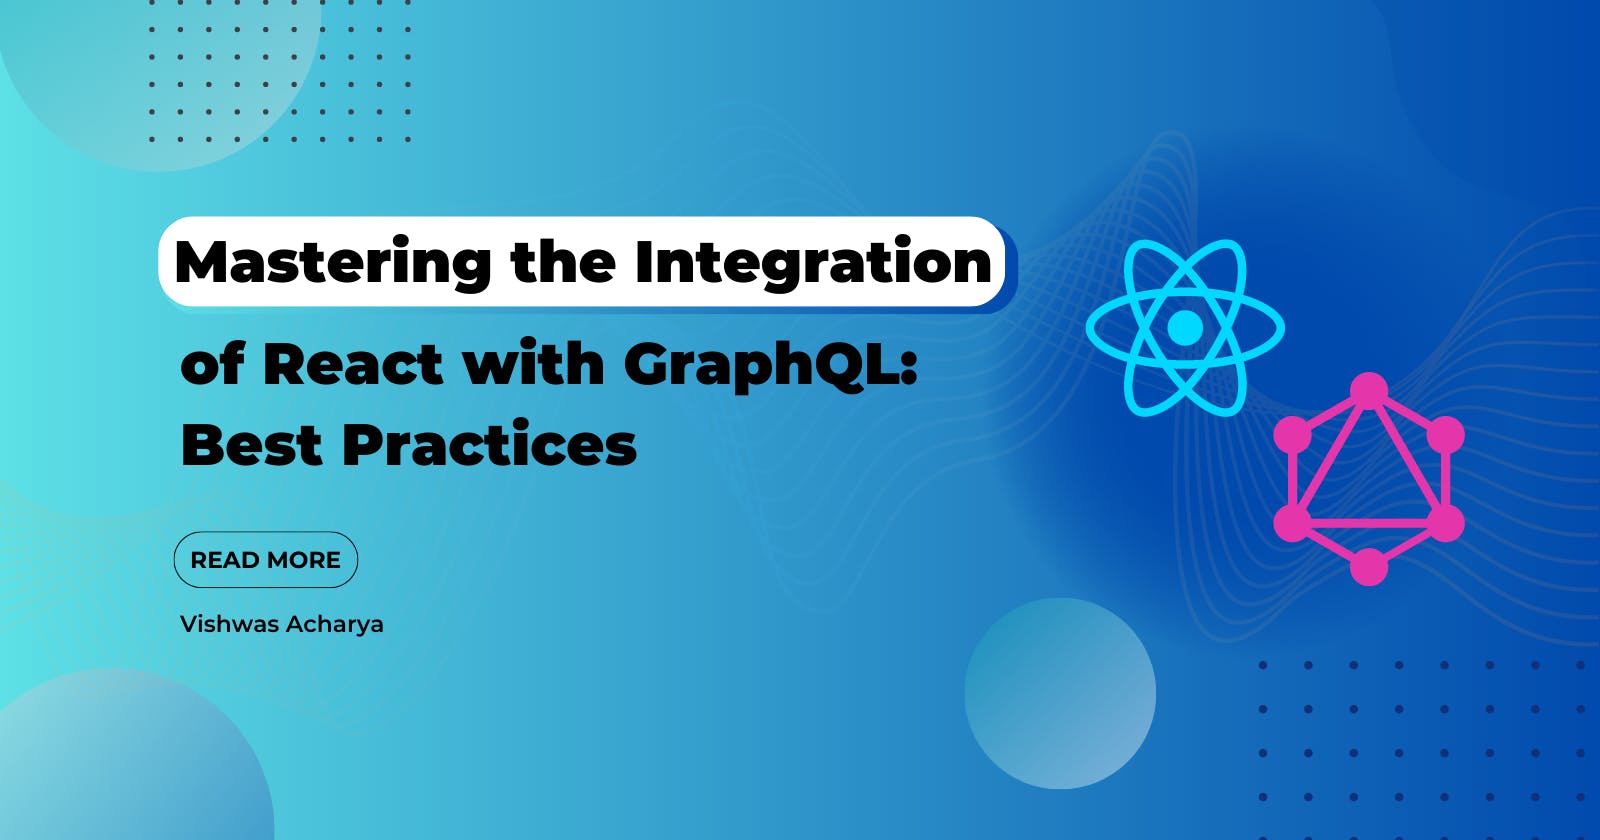 Best practices for integrating React with GraphQL